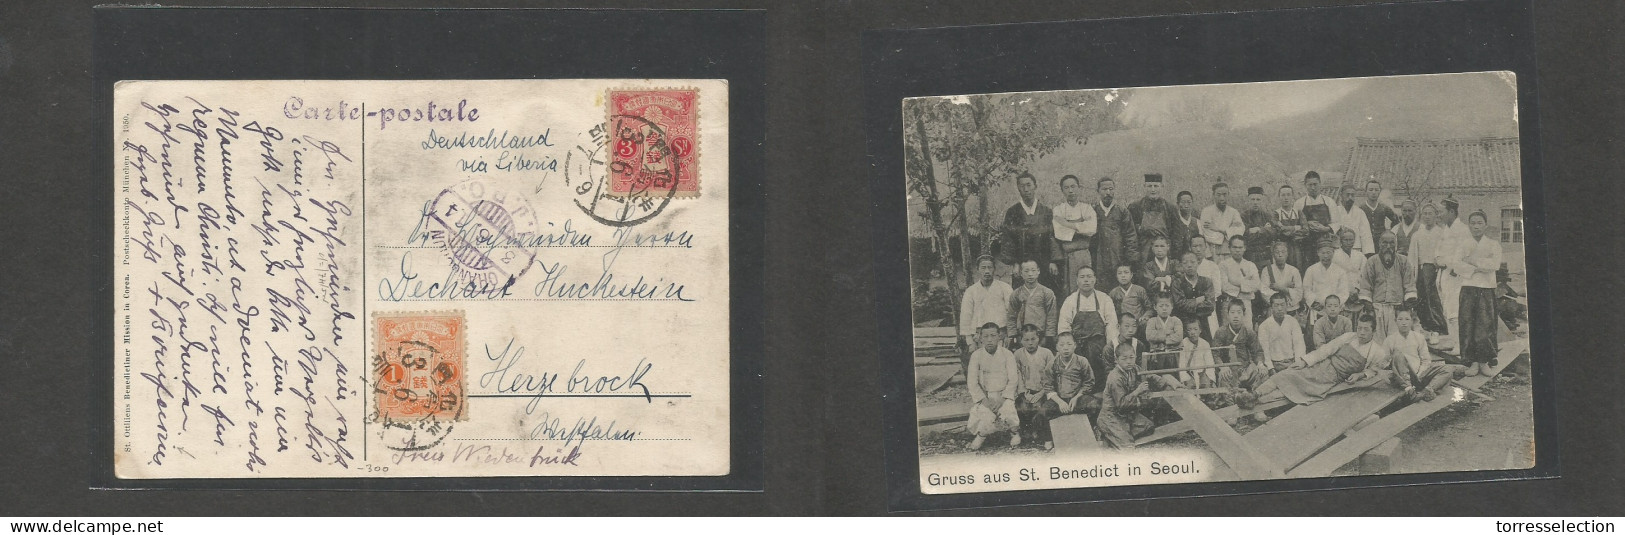 KOREA. 1914 (1 June) WWI. Missionary Mail. St. Benedict, Seoul (as Per Text). Japan Fkd Photo Ppc, Tied Cds. Routed Via  - Korea (...-1945)